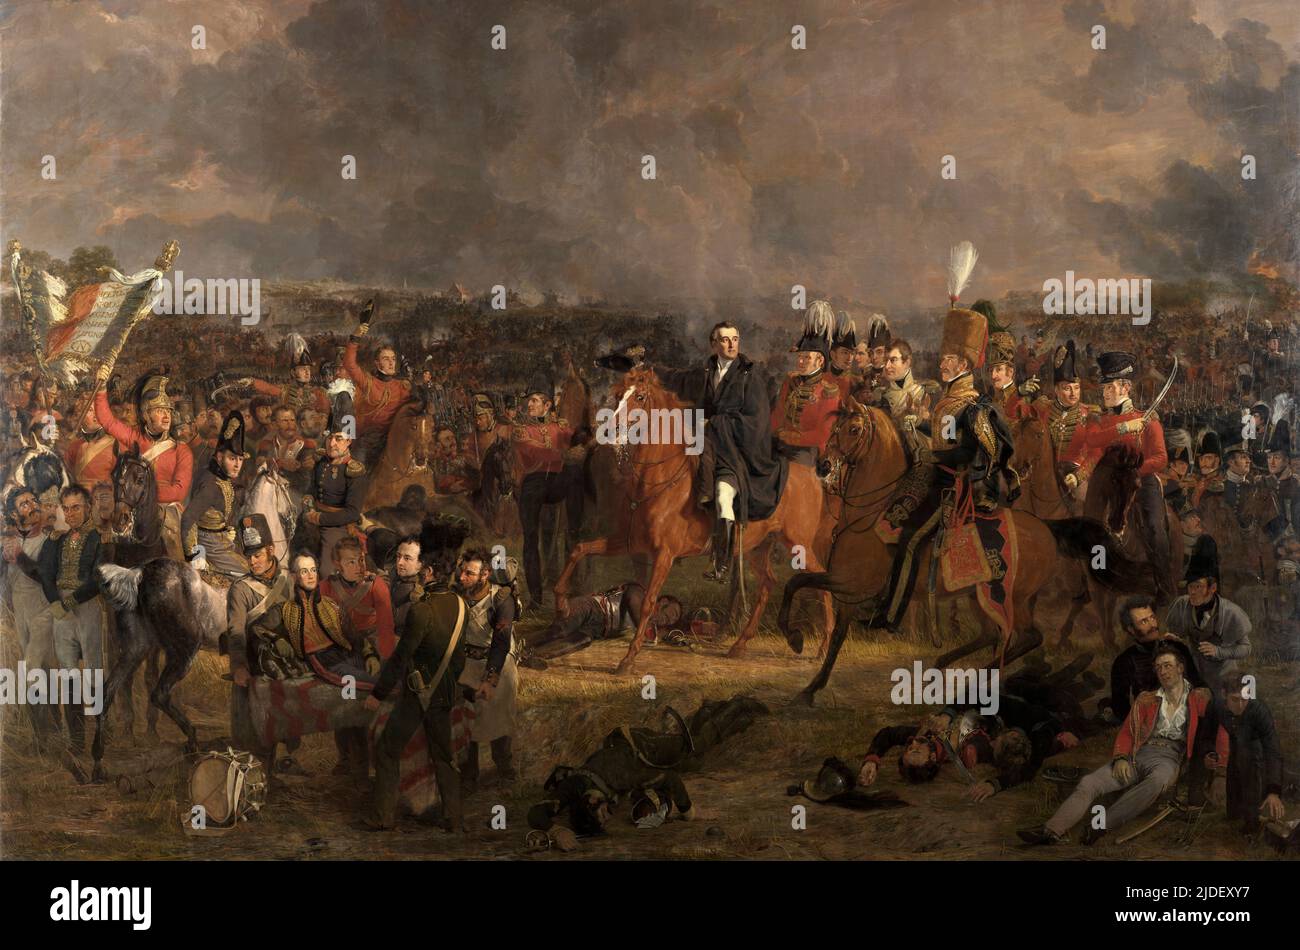 The Battle of Waterloo, Jan Willem Pieneman, 1824 -Here the Duke of Wellington is receiving the message that Prussian forces are coming to his aid. Wellington, commander of the Anglo-Dutch troops, is the central figure in this group portrait of the major players at Waterloo. Lying wounded on a stretcher in the left foreground is the Dutch Crown Prince, later King William II. Stock Photo